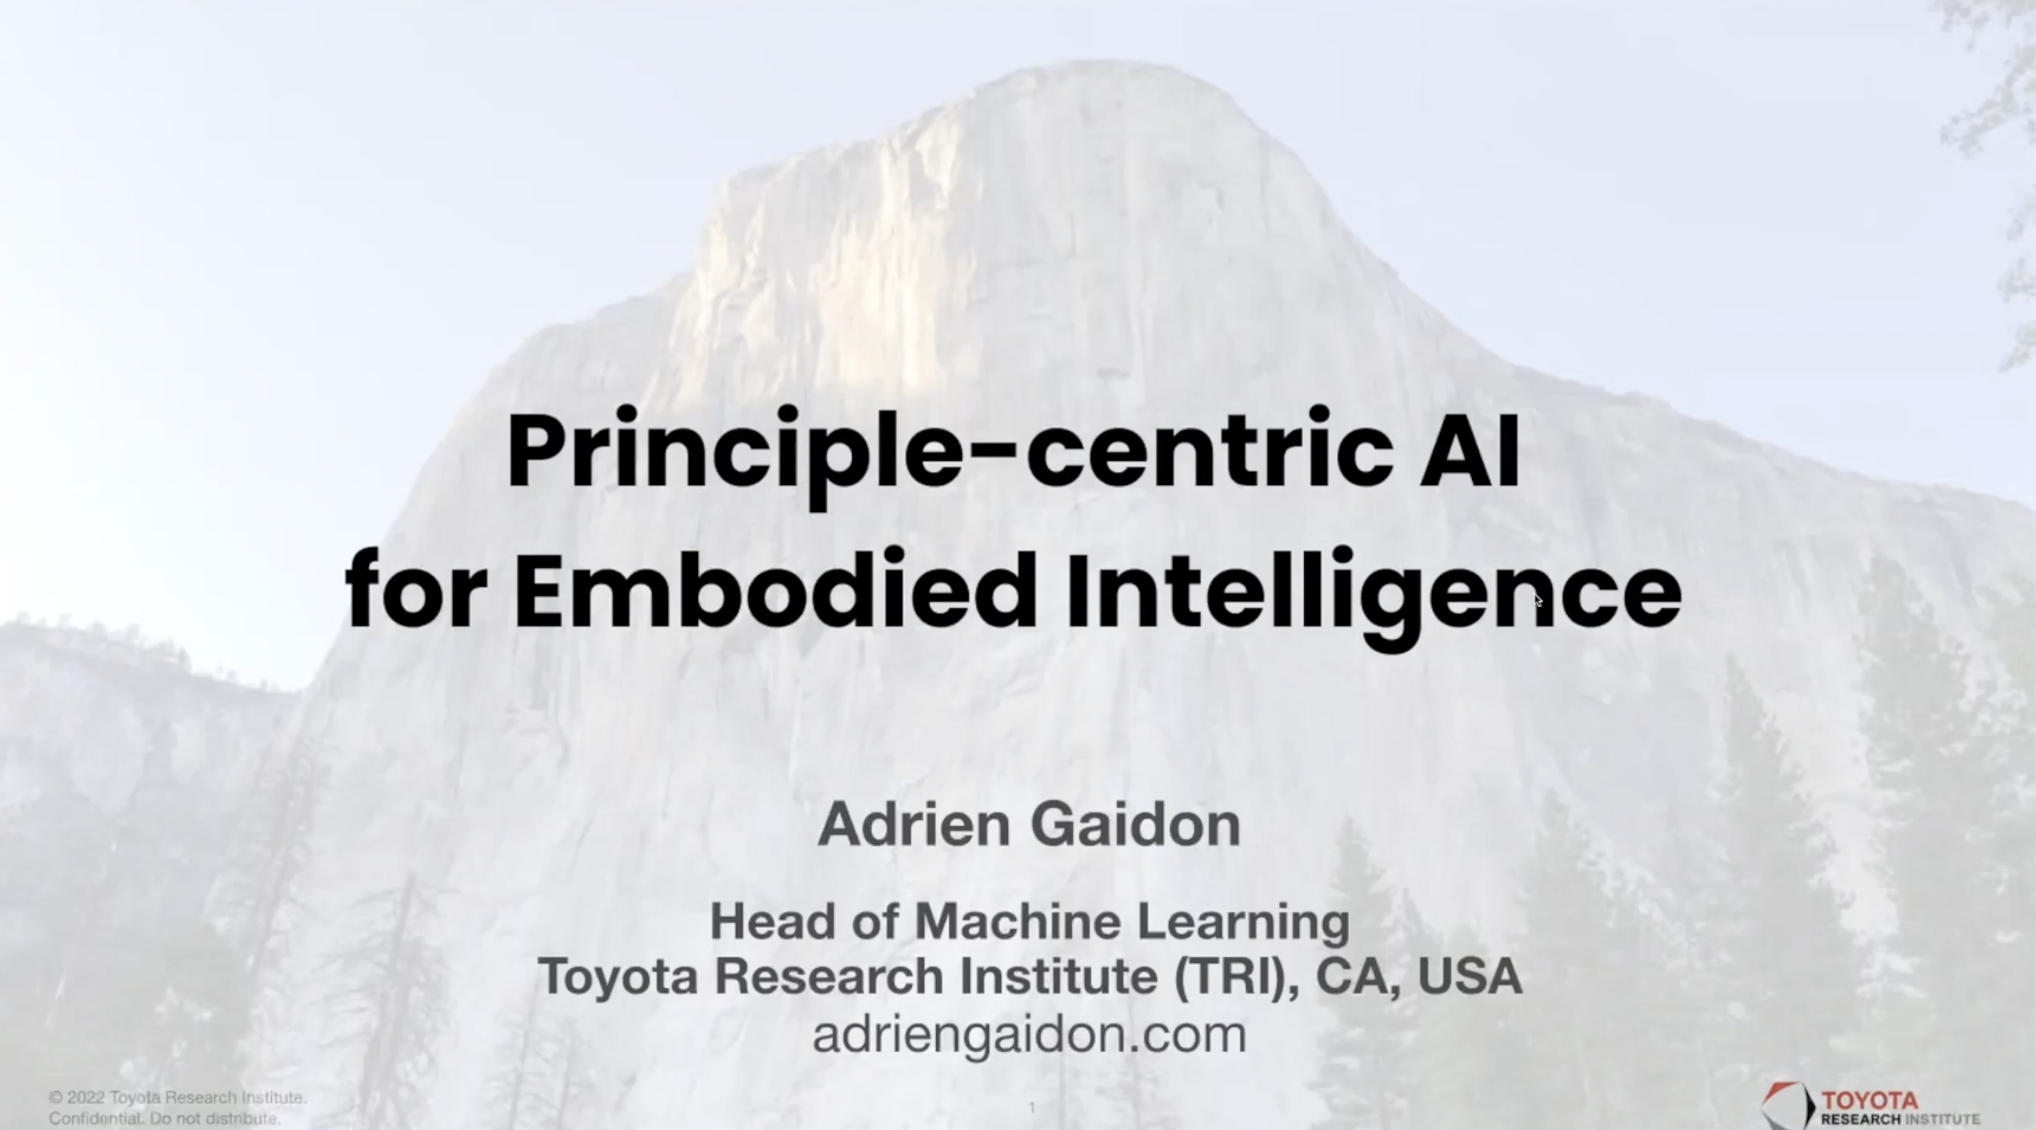 Principle-centric AI for Embodied Intelligence